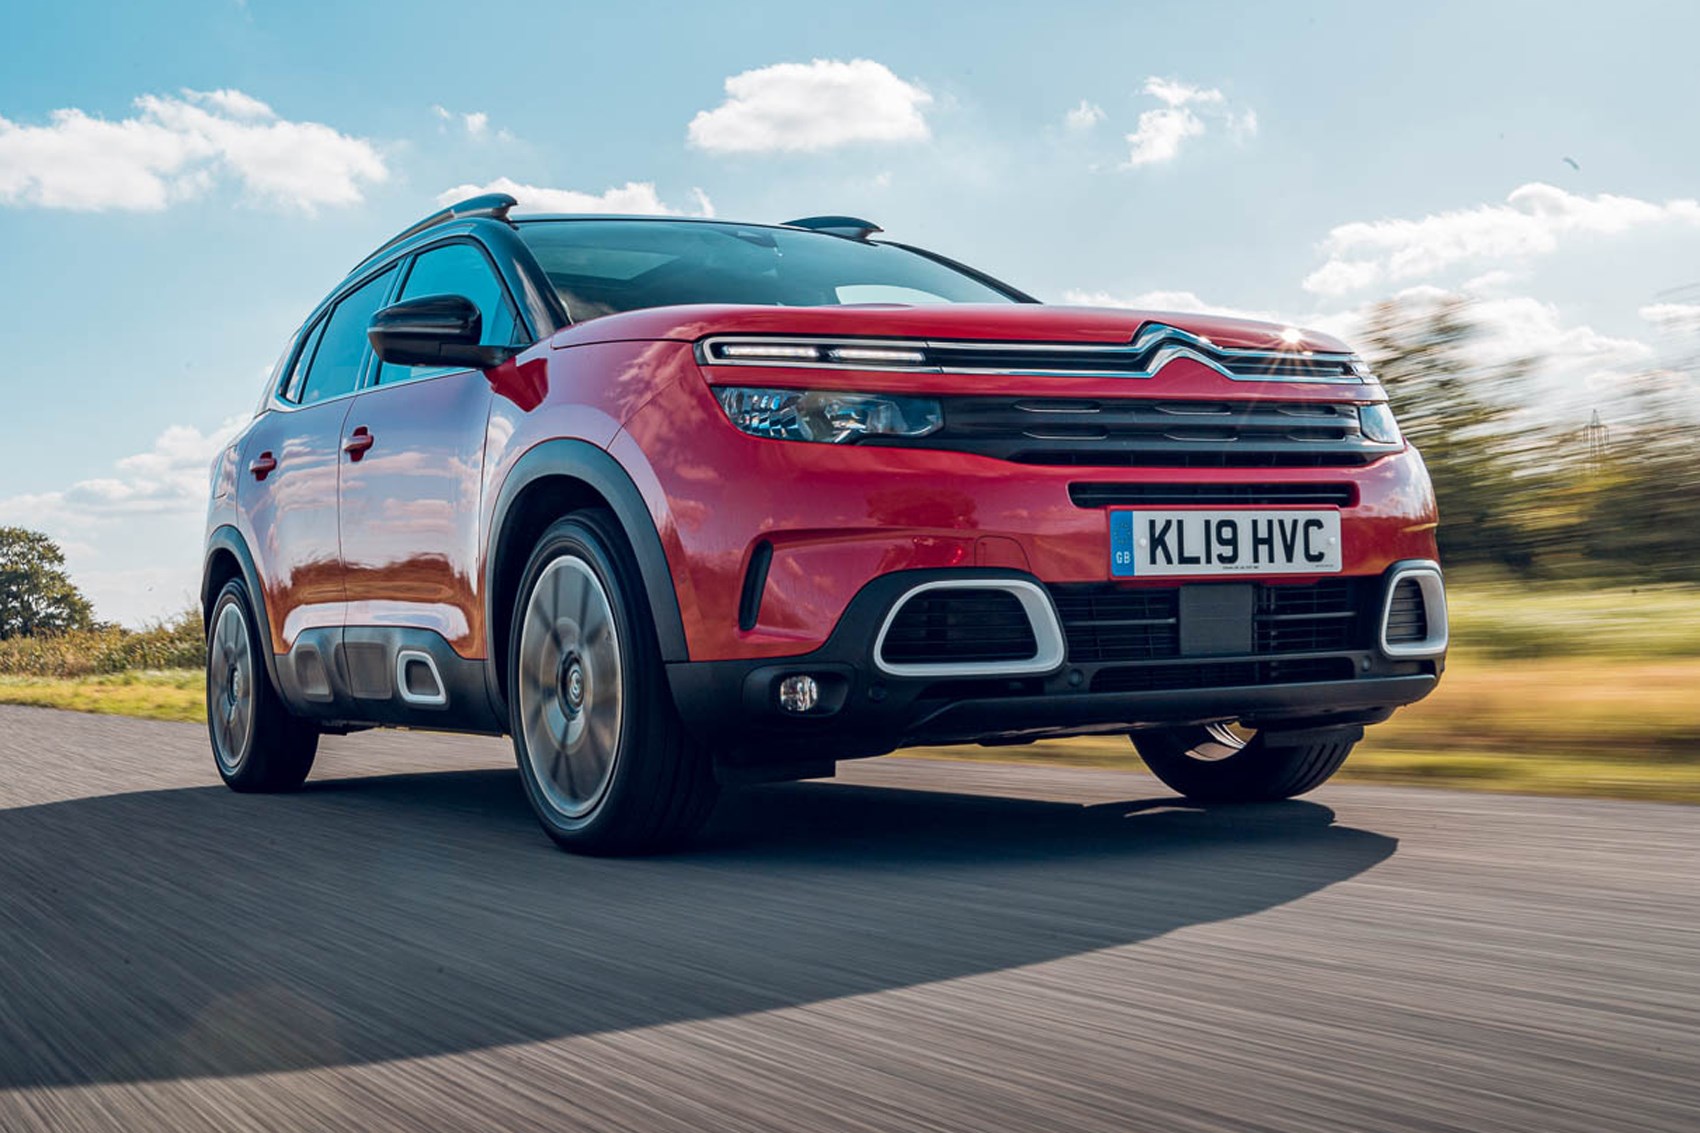 Citroen C5 Aircross long term review, first report - Introduction